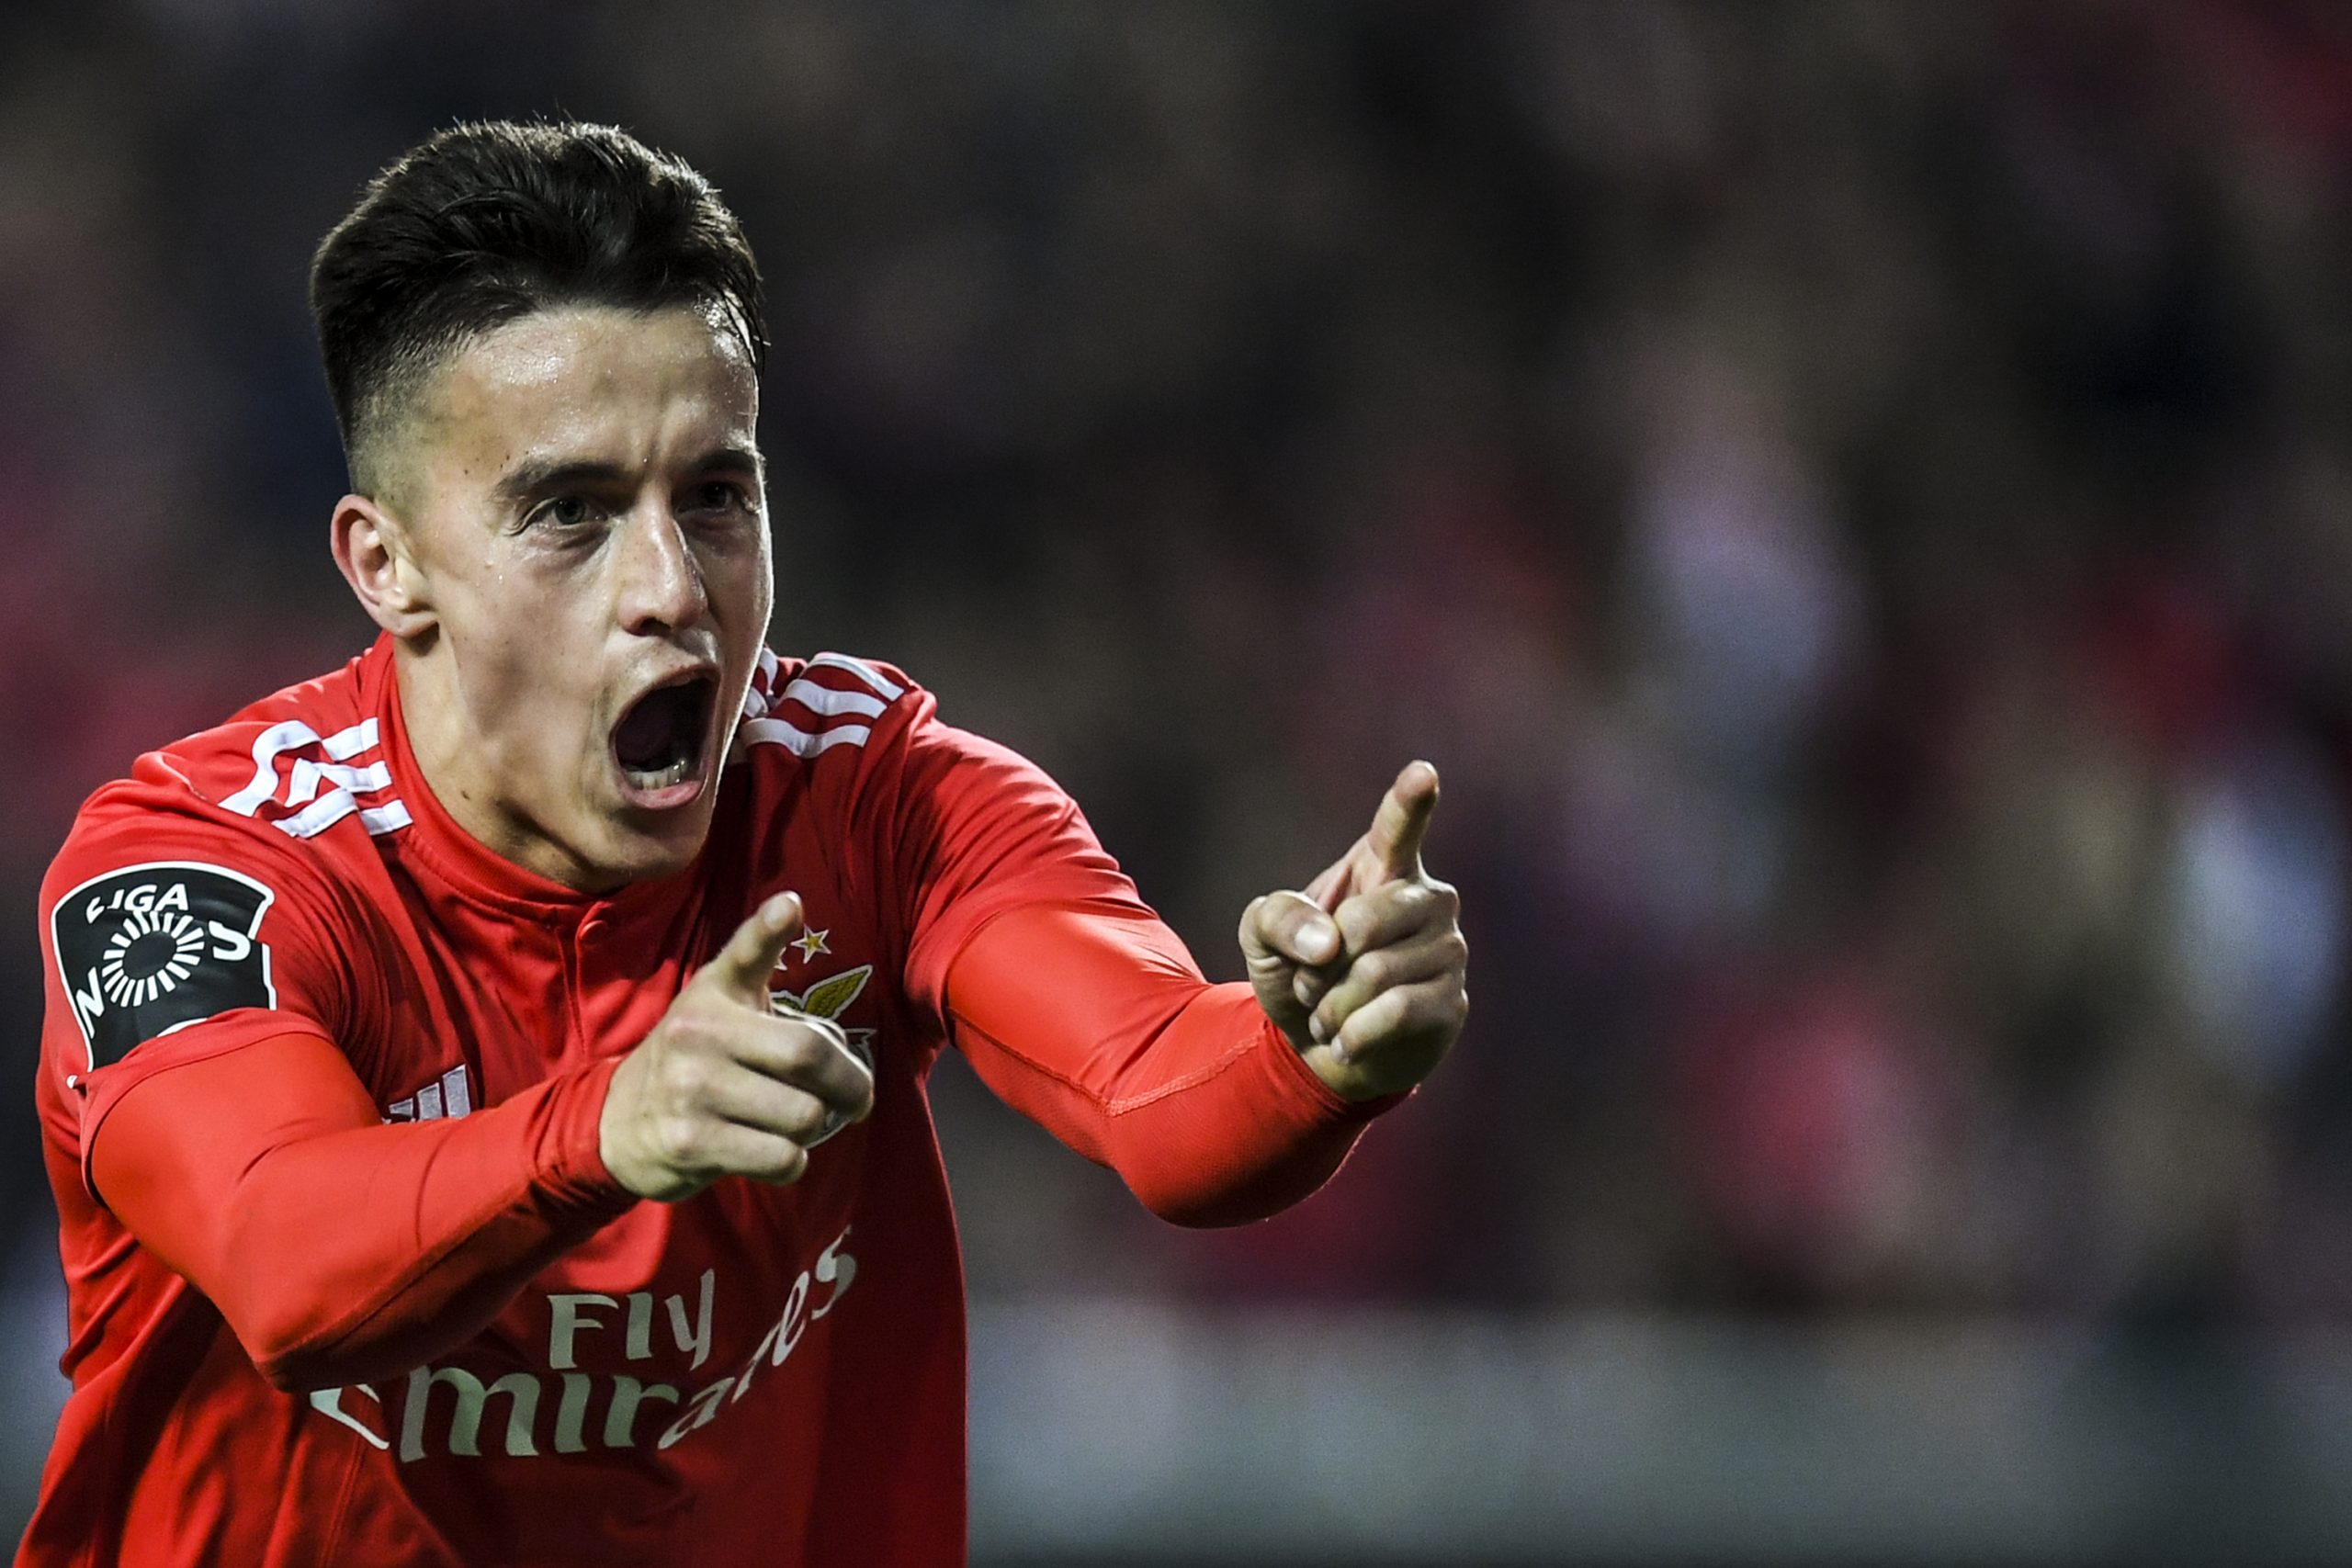 Franco Cervi helped his side lift the league title in the 2018/19 campaign (Getty Images)